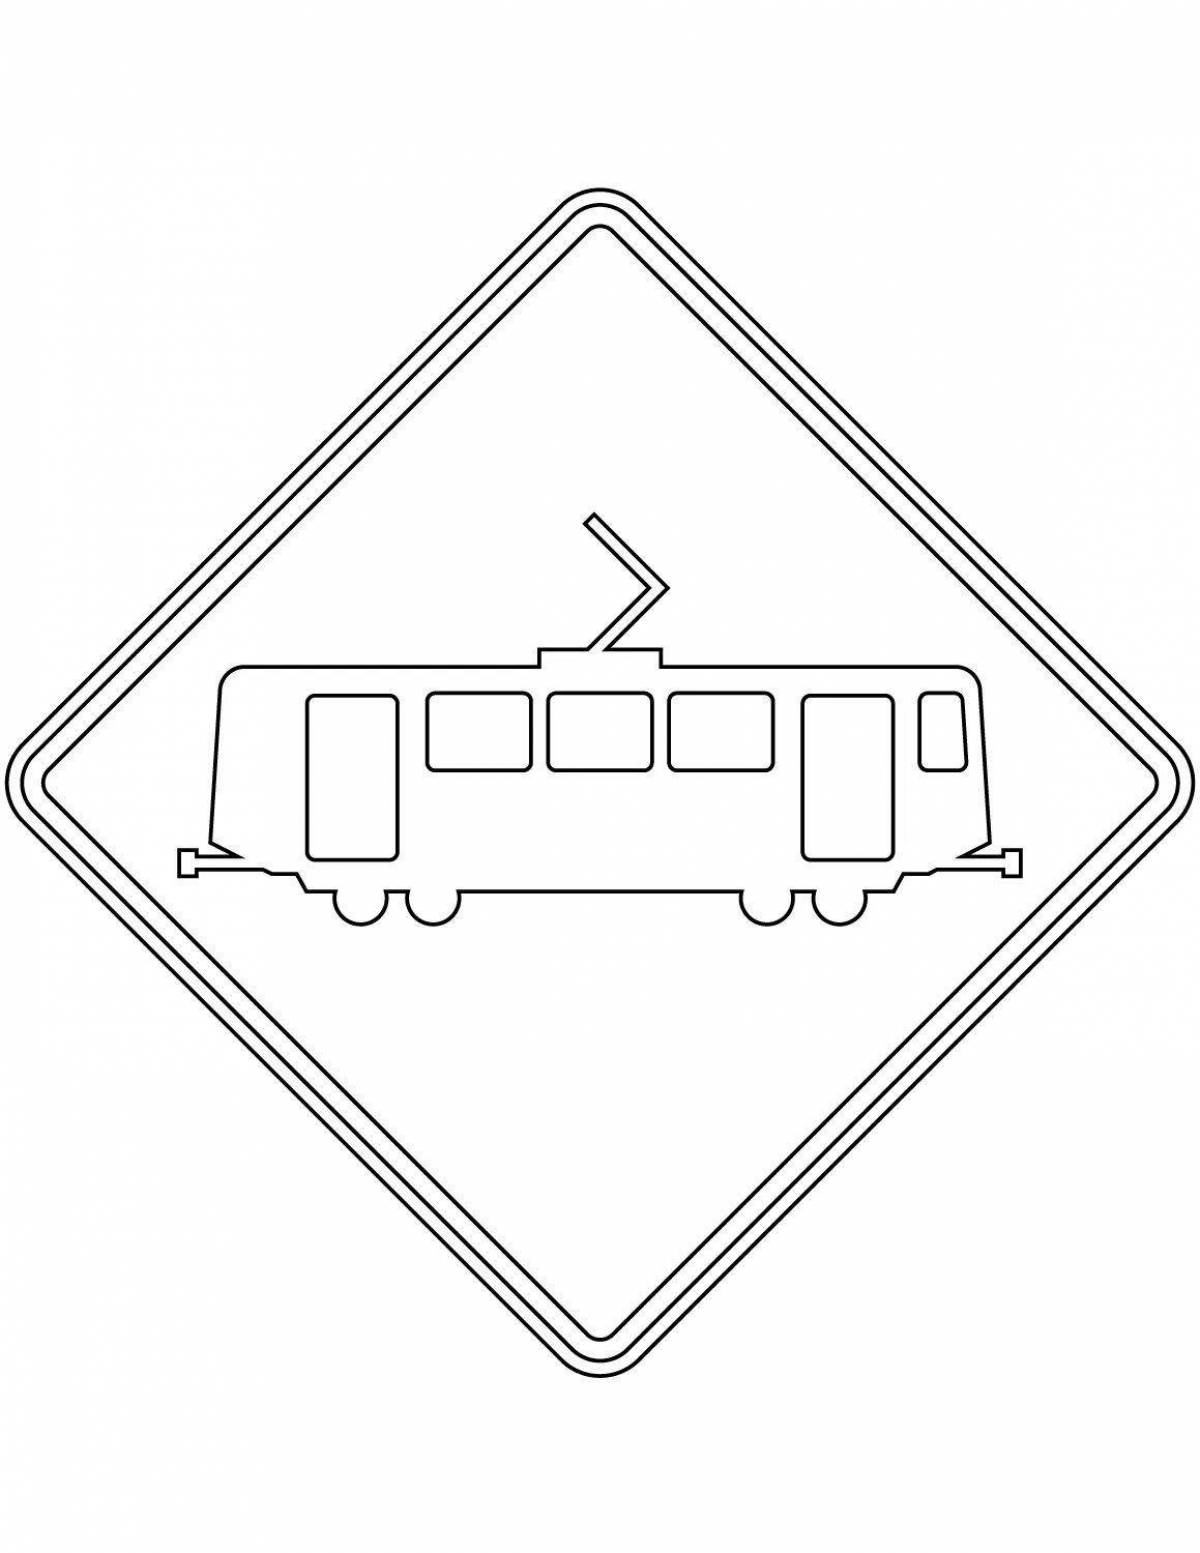 Coloring page busy main road sign